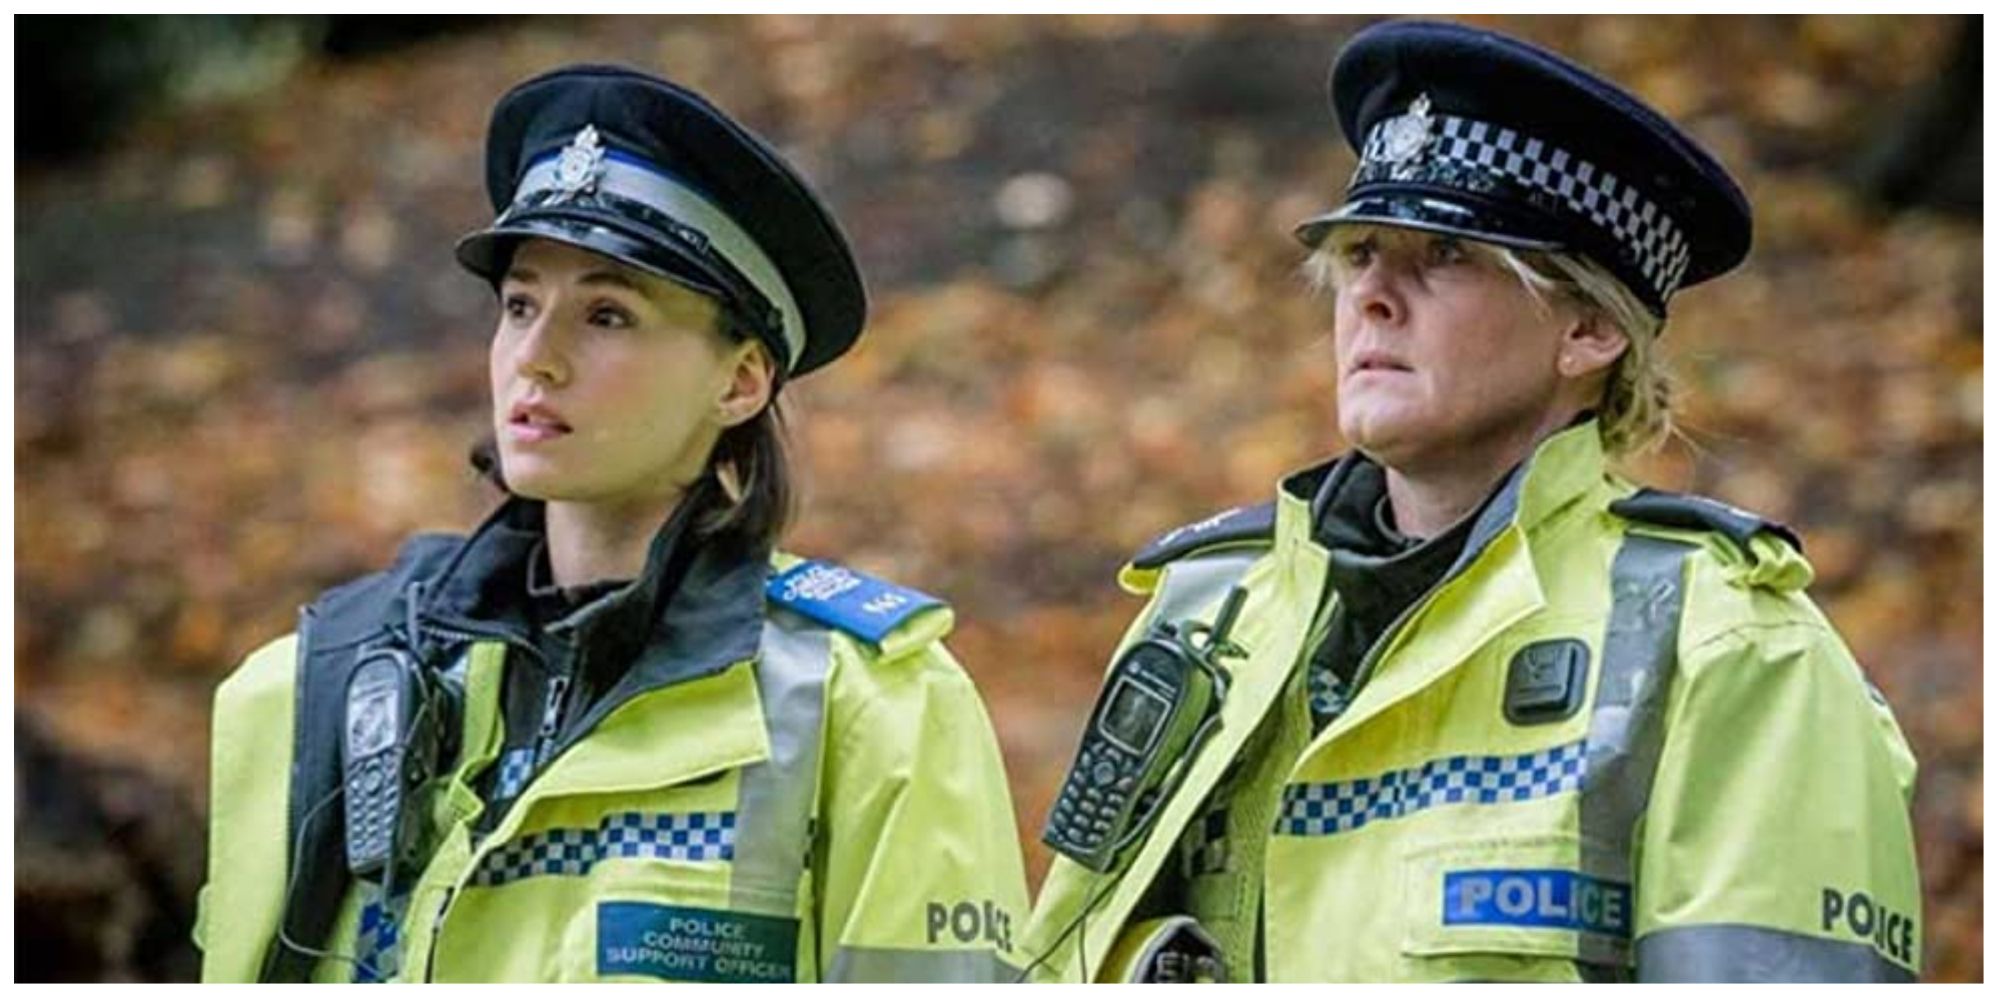 Two police officers in Happy Valley looking at a crime scene (offscreen)